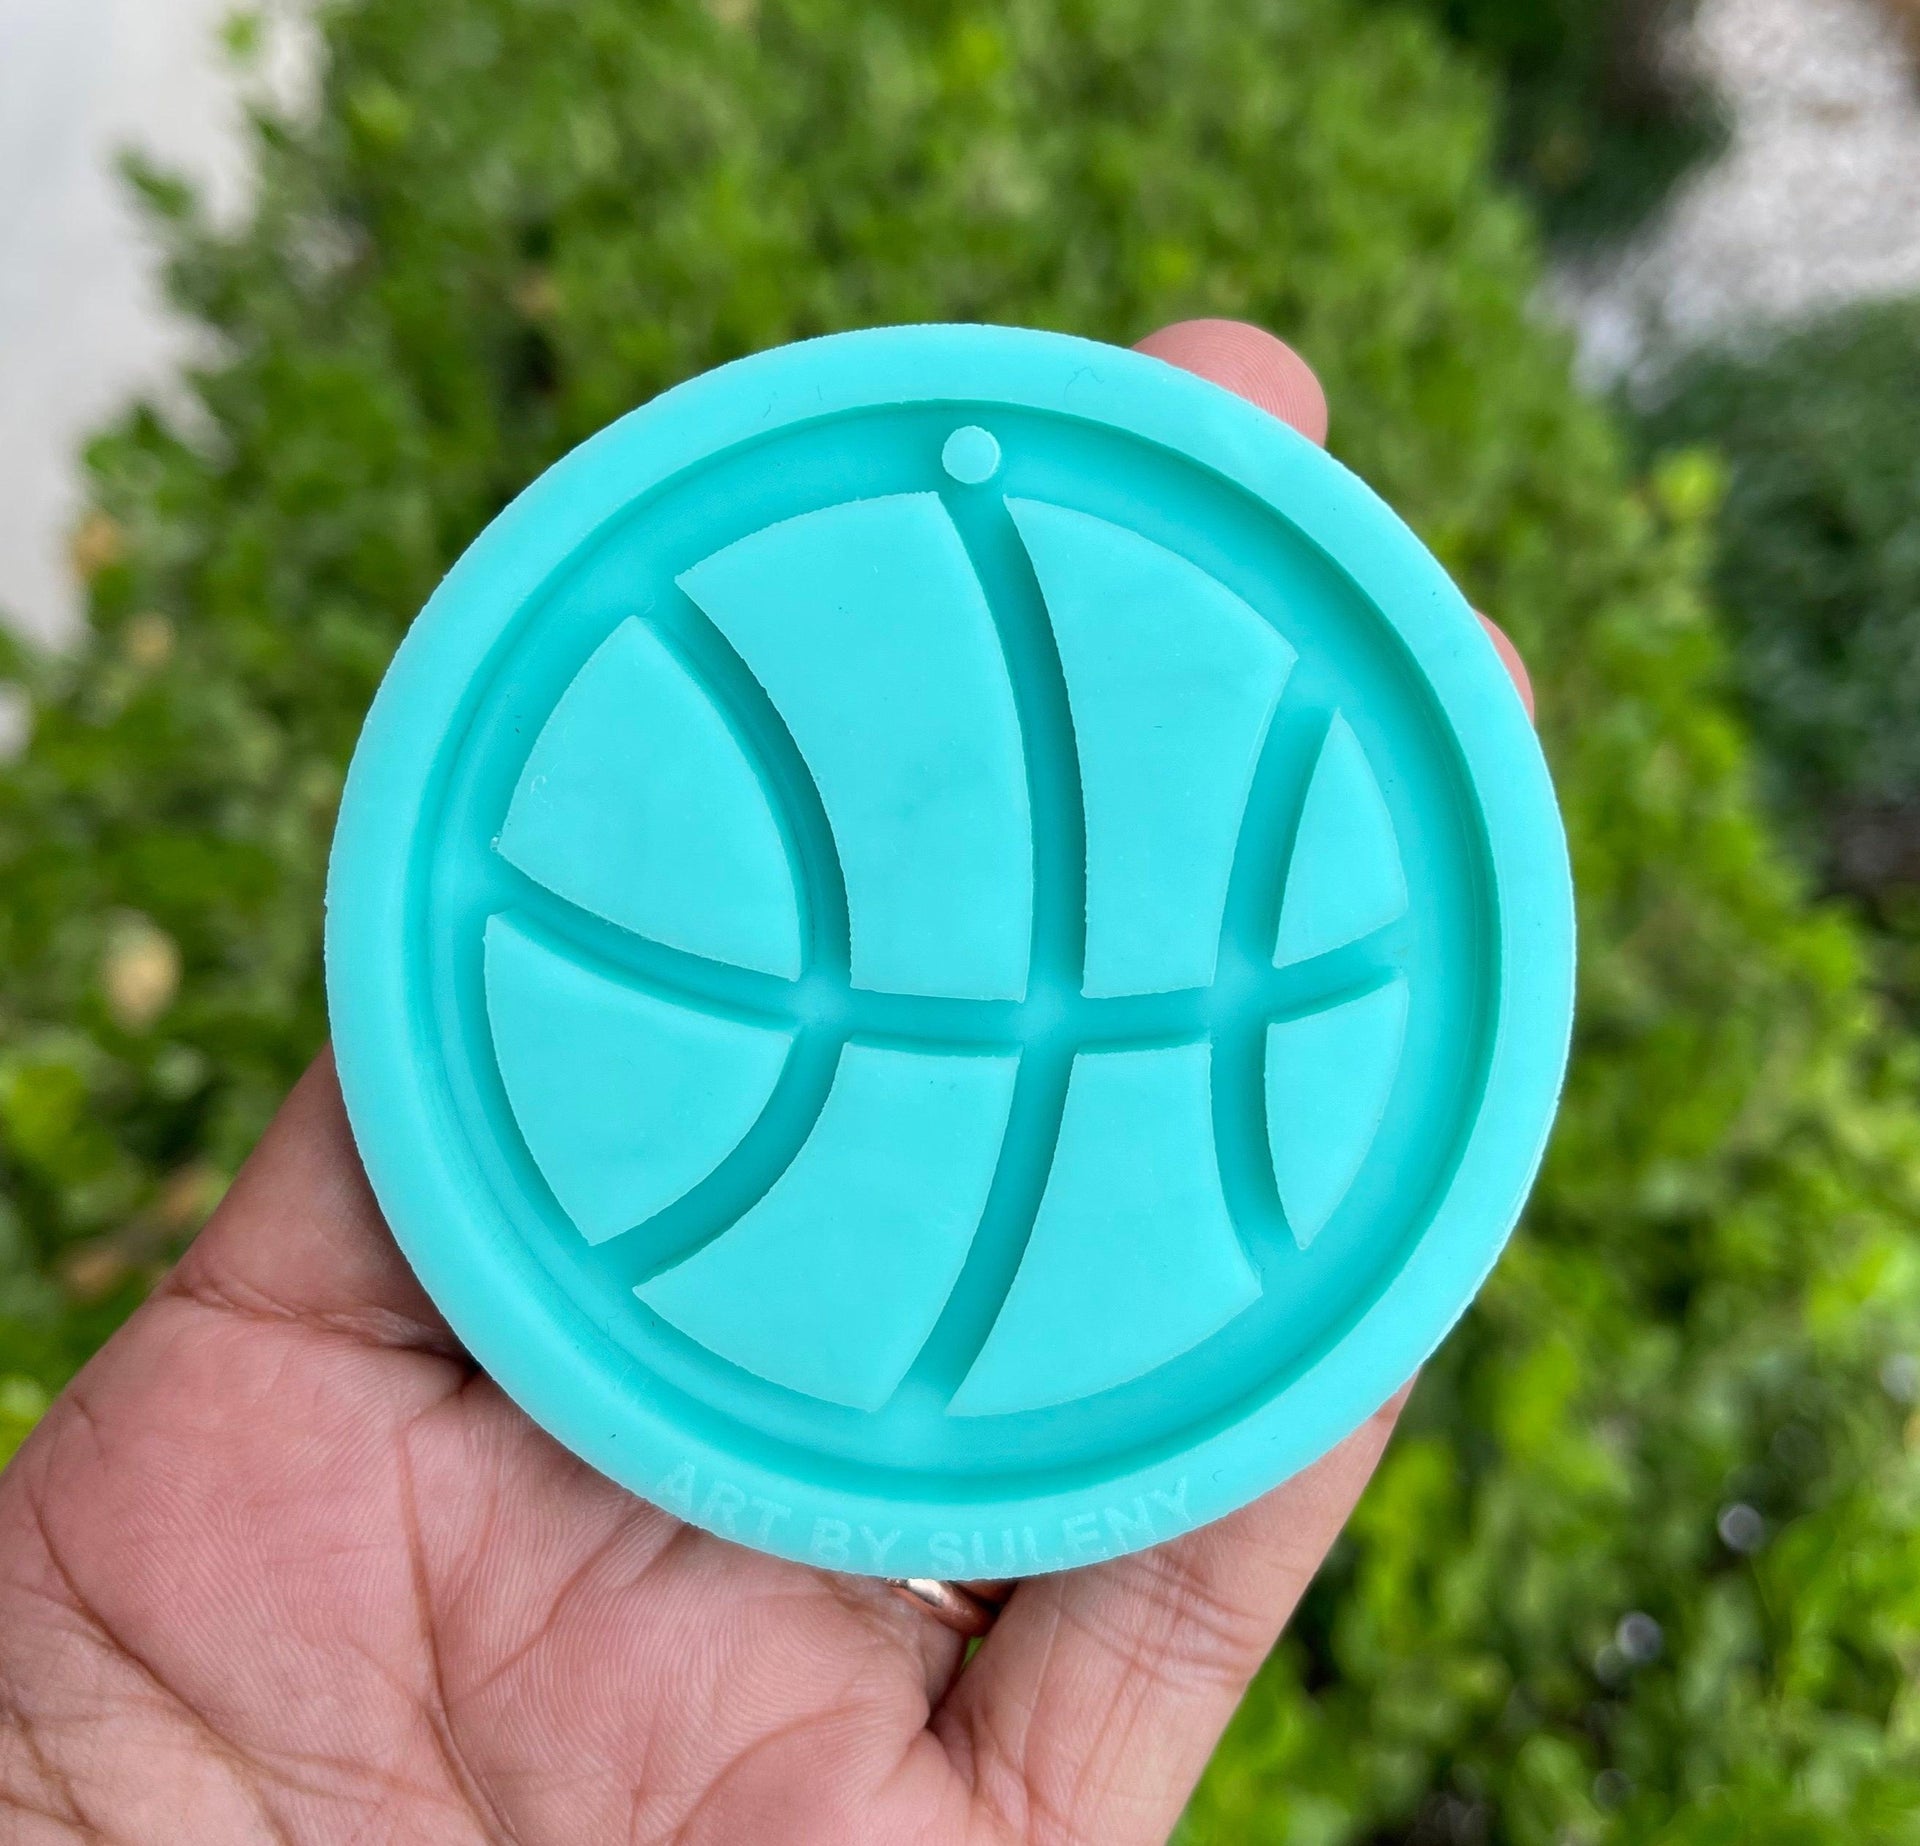 Basketball Keychain Mold - Mold for Resin - Basketball Mold - NBA Ball Mold - Keychain mold - Silicone Mold for Epoxy Resin - Art By Suleny Craft Store LLC